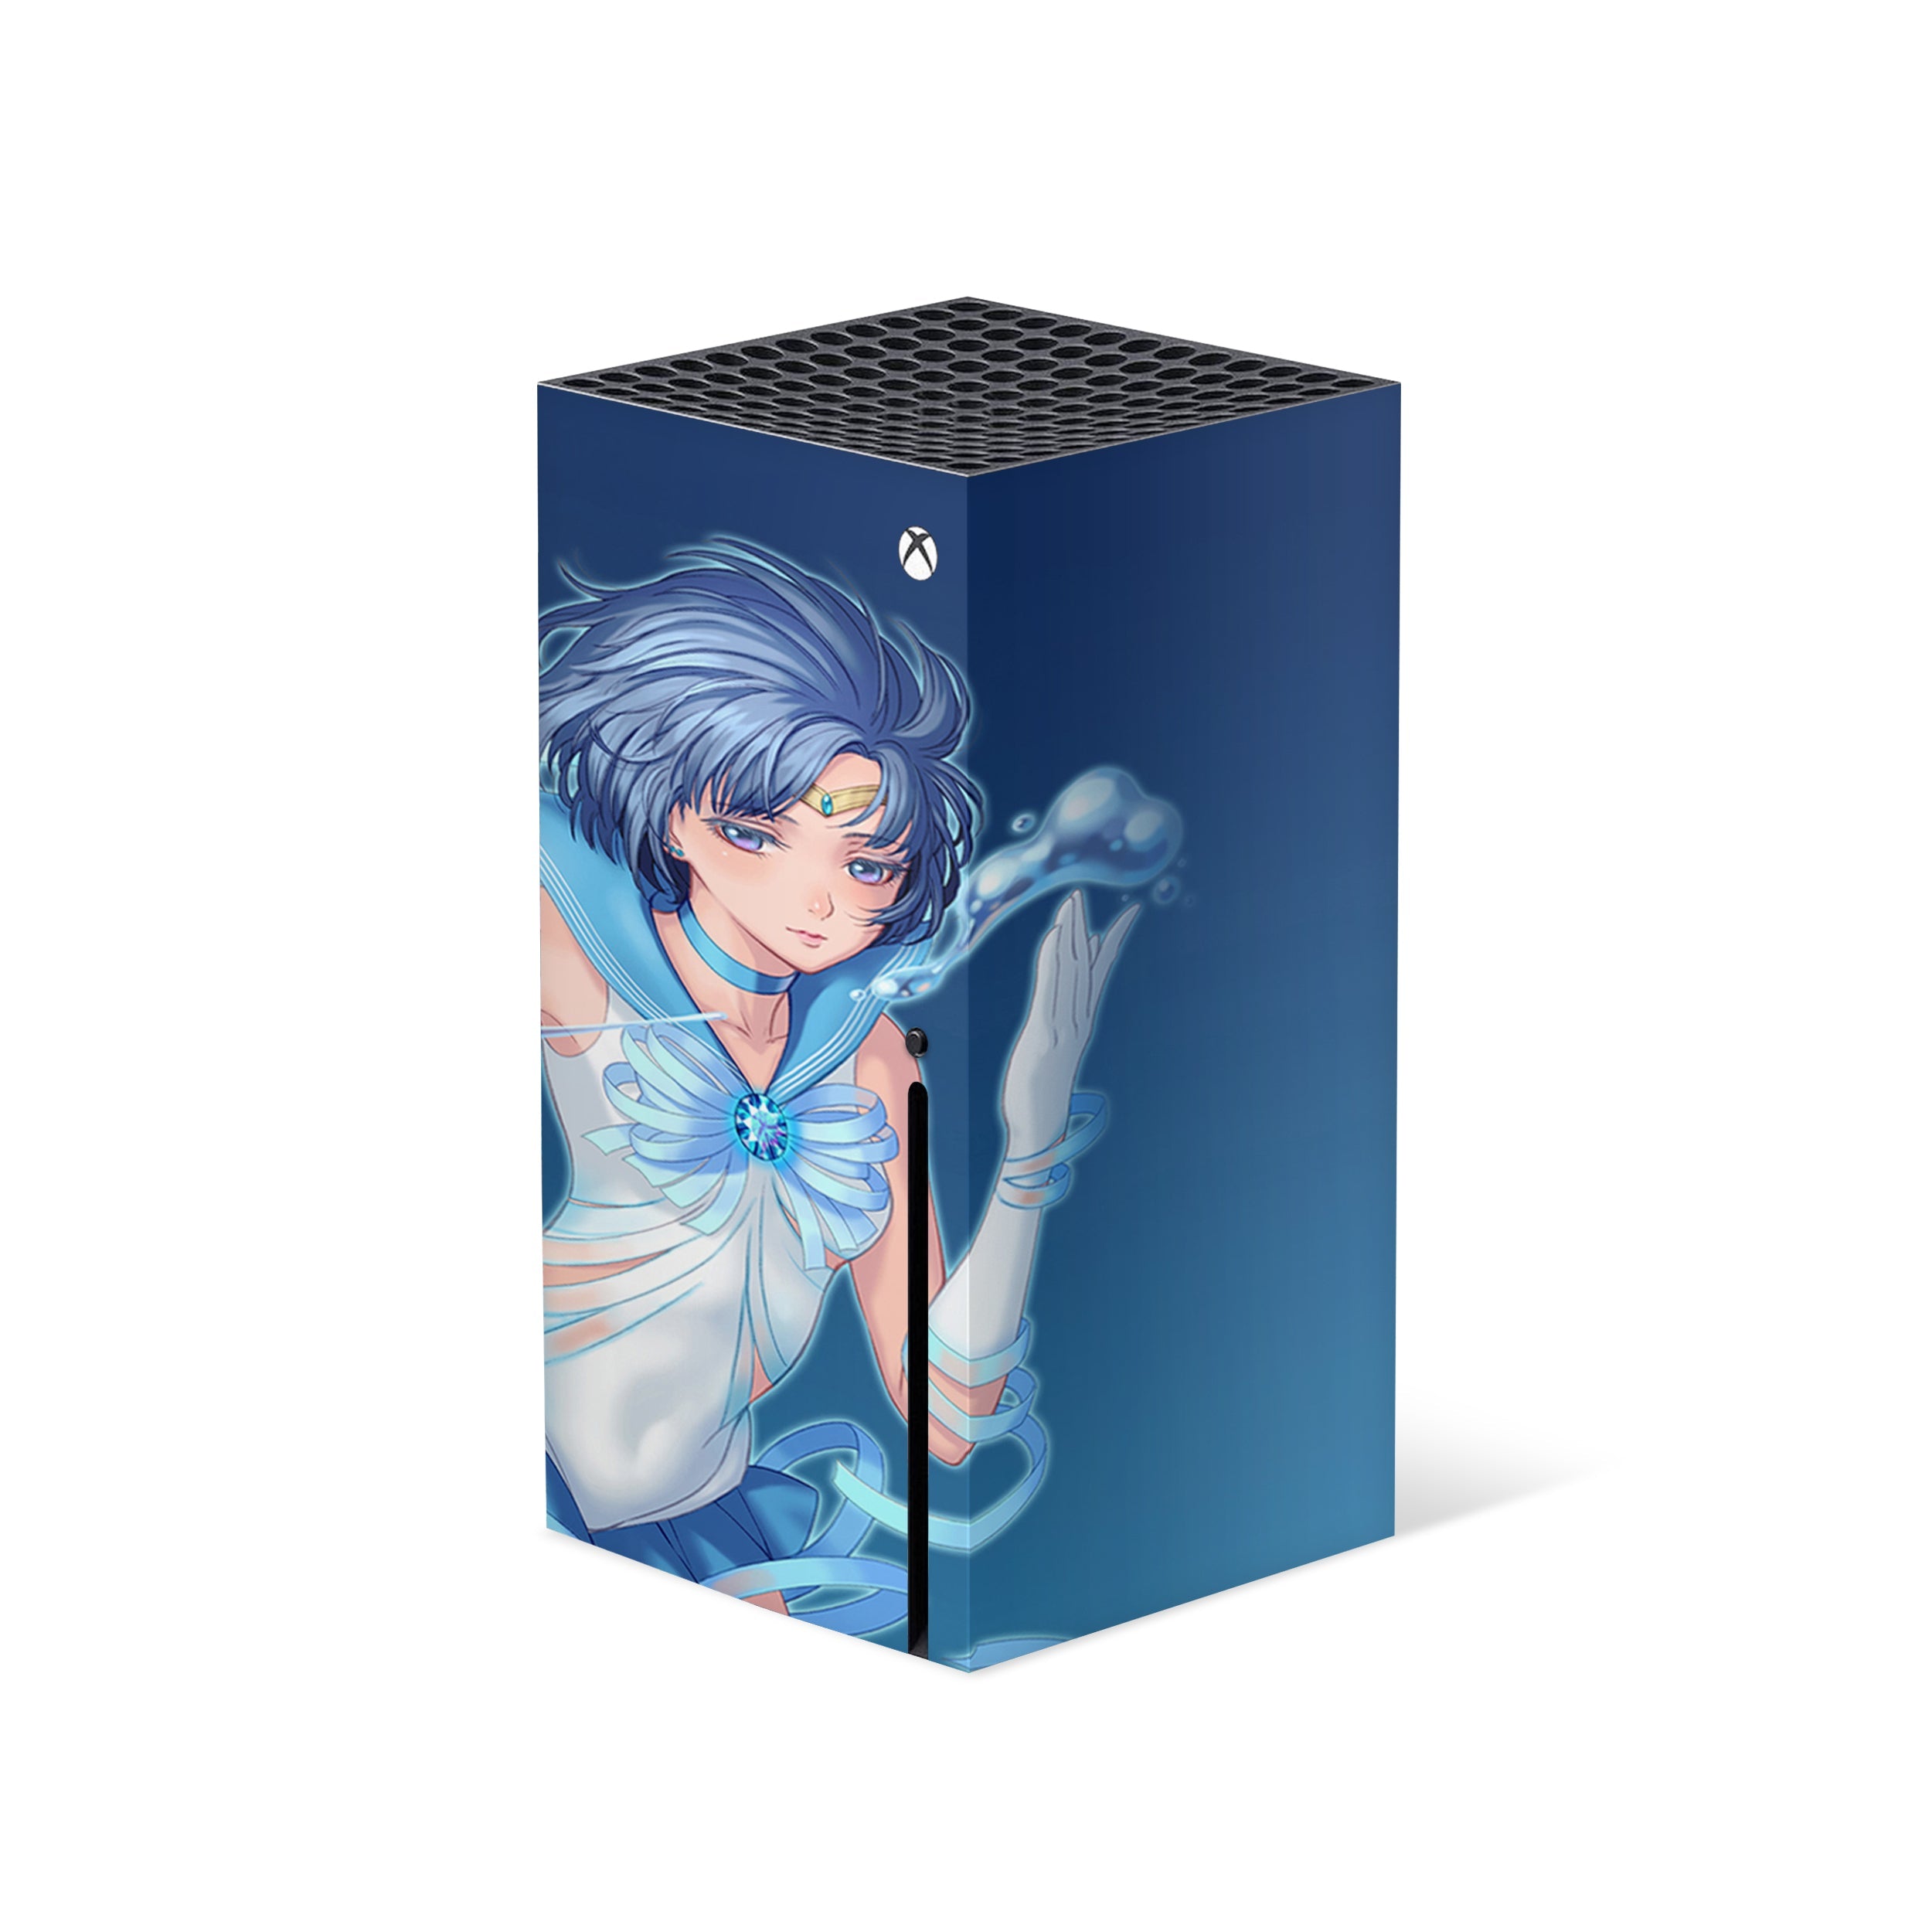 A video game skin featuring a Sailor Moon Mercury design for the Xbox Series X.